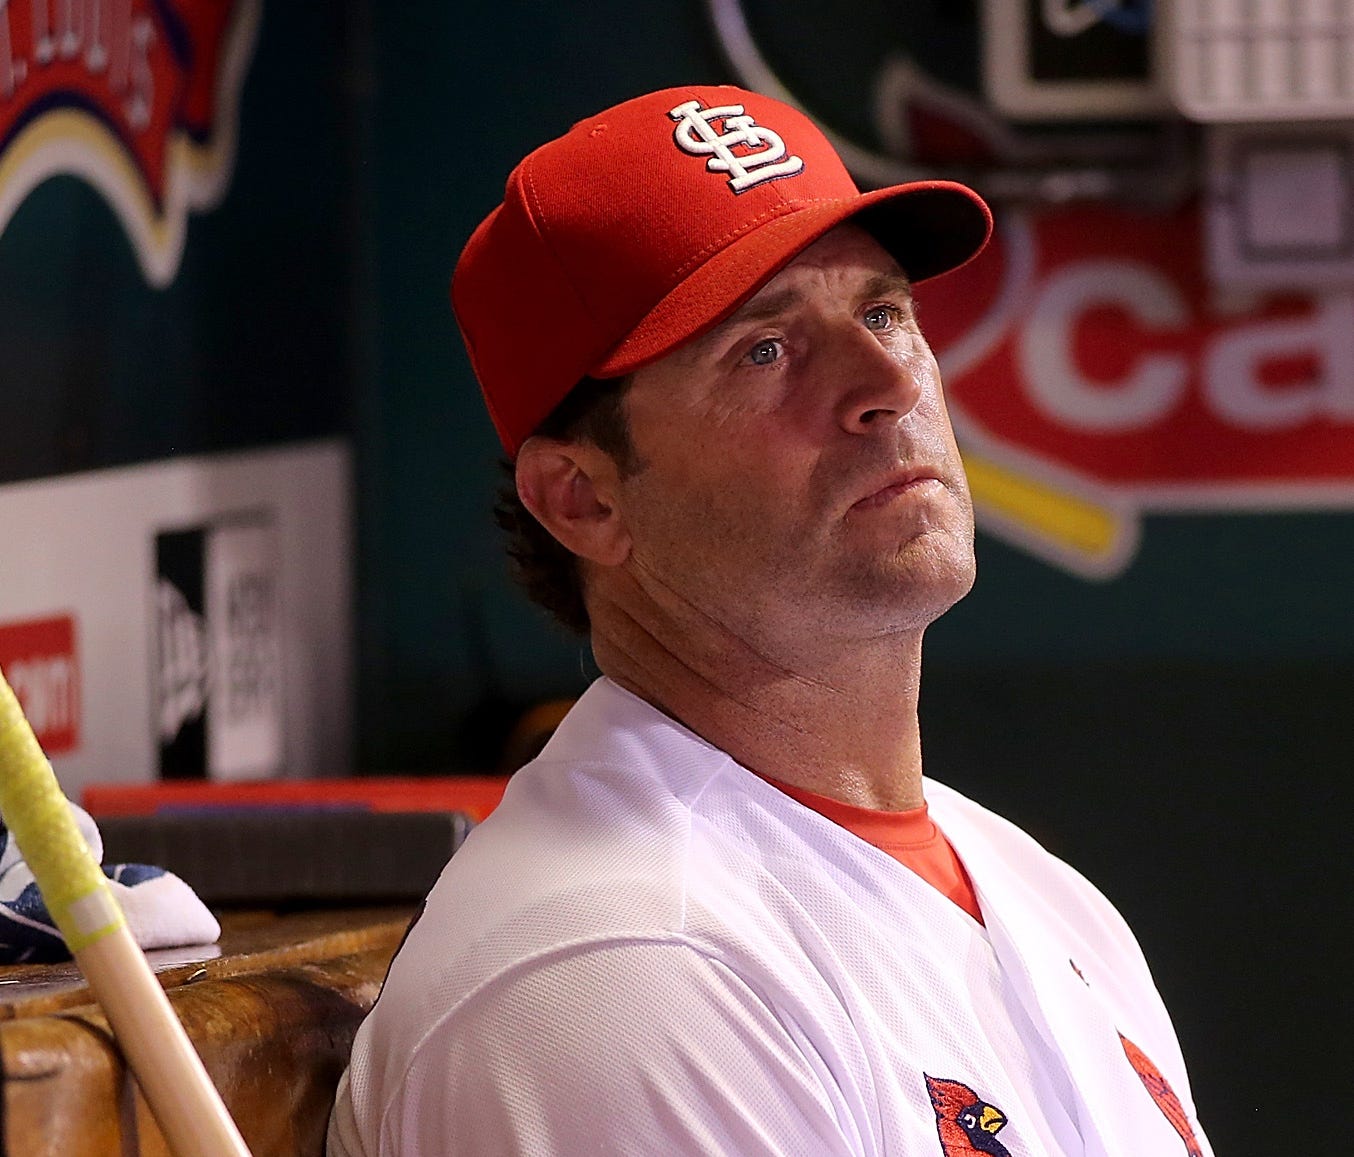 Firing Mike Matheny less than 24 hours before the All-Star break spoke volumes about Cardinals management's view towards Matheny and his staff.